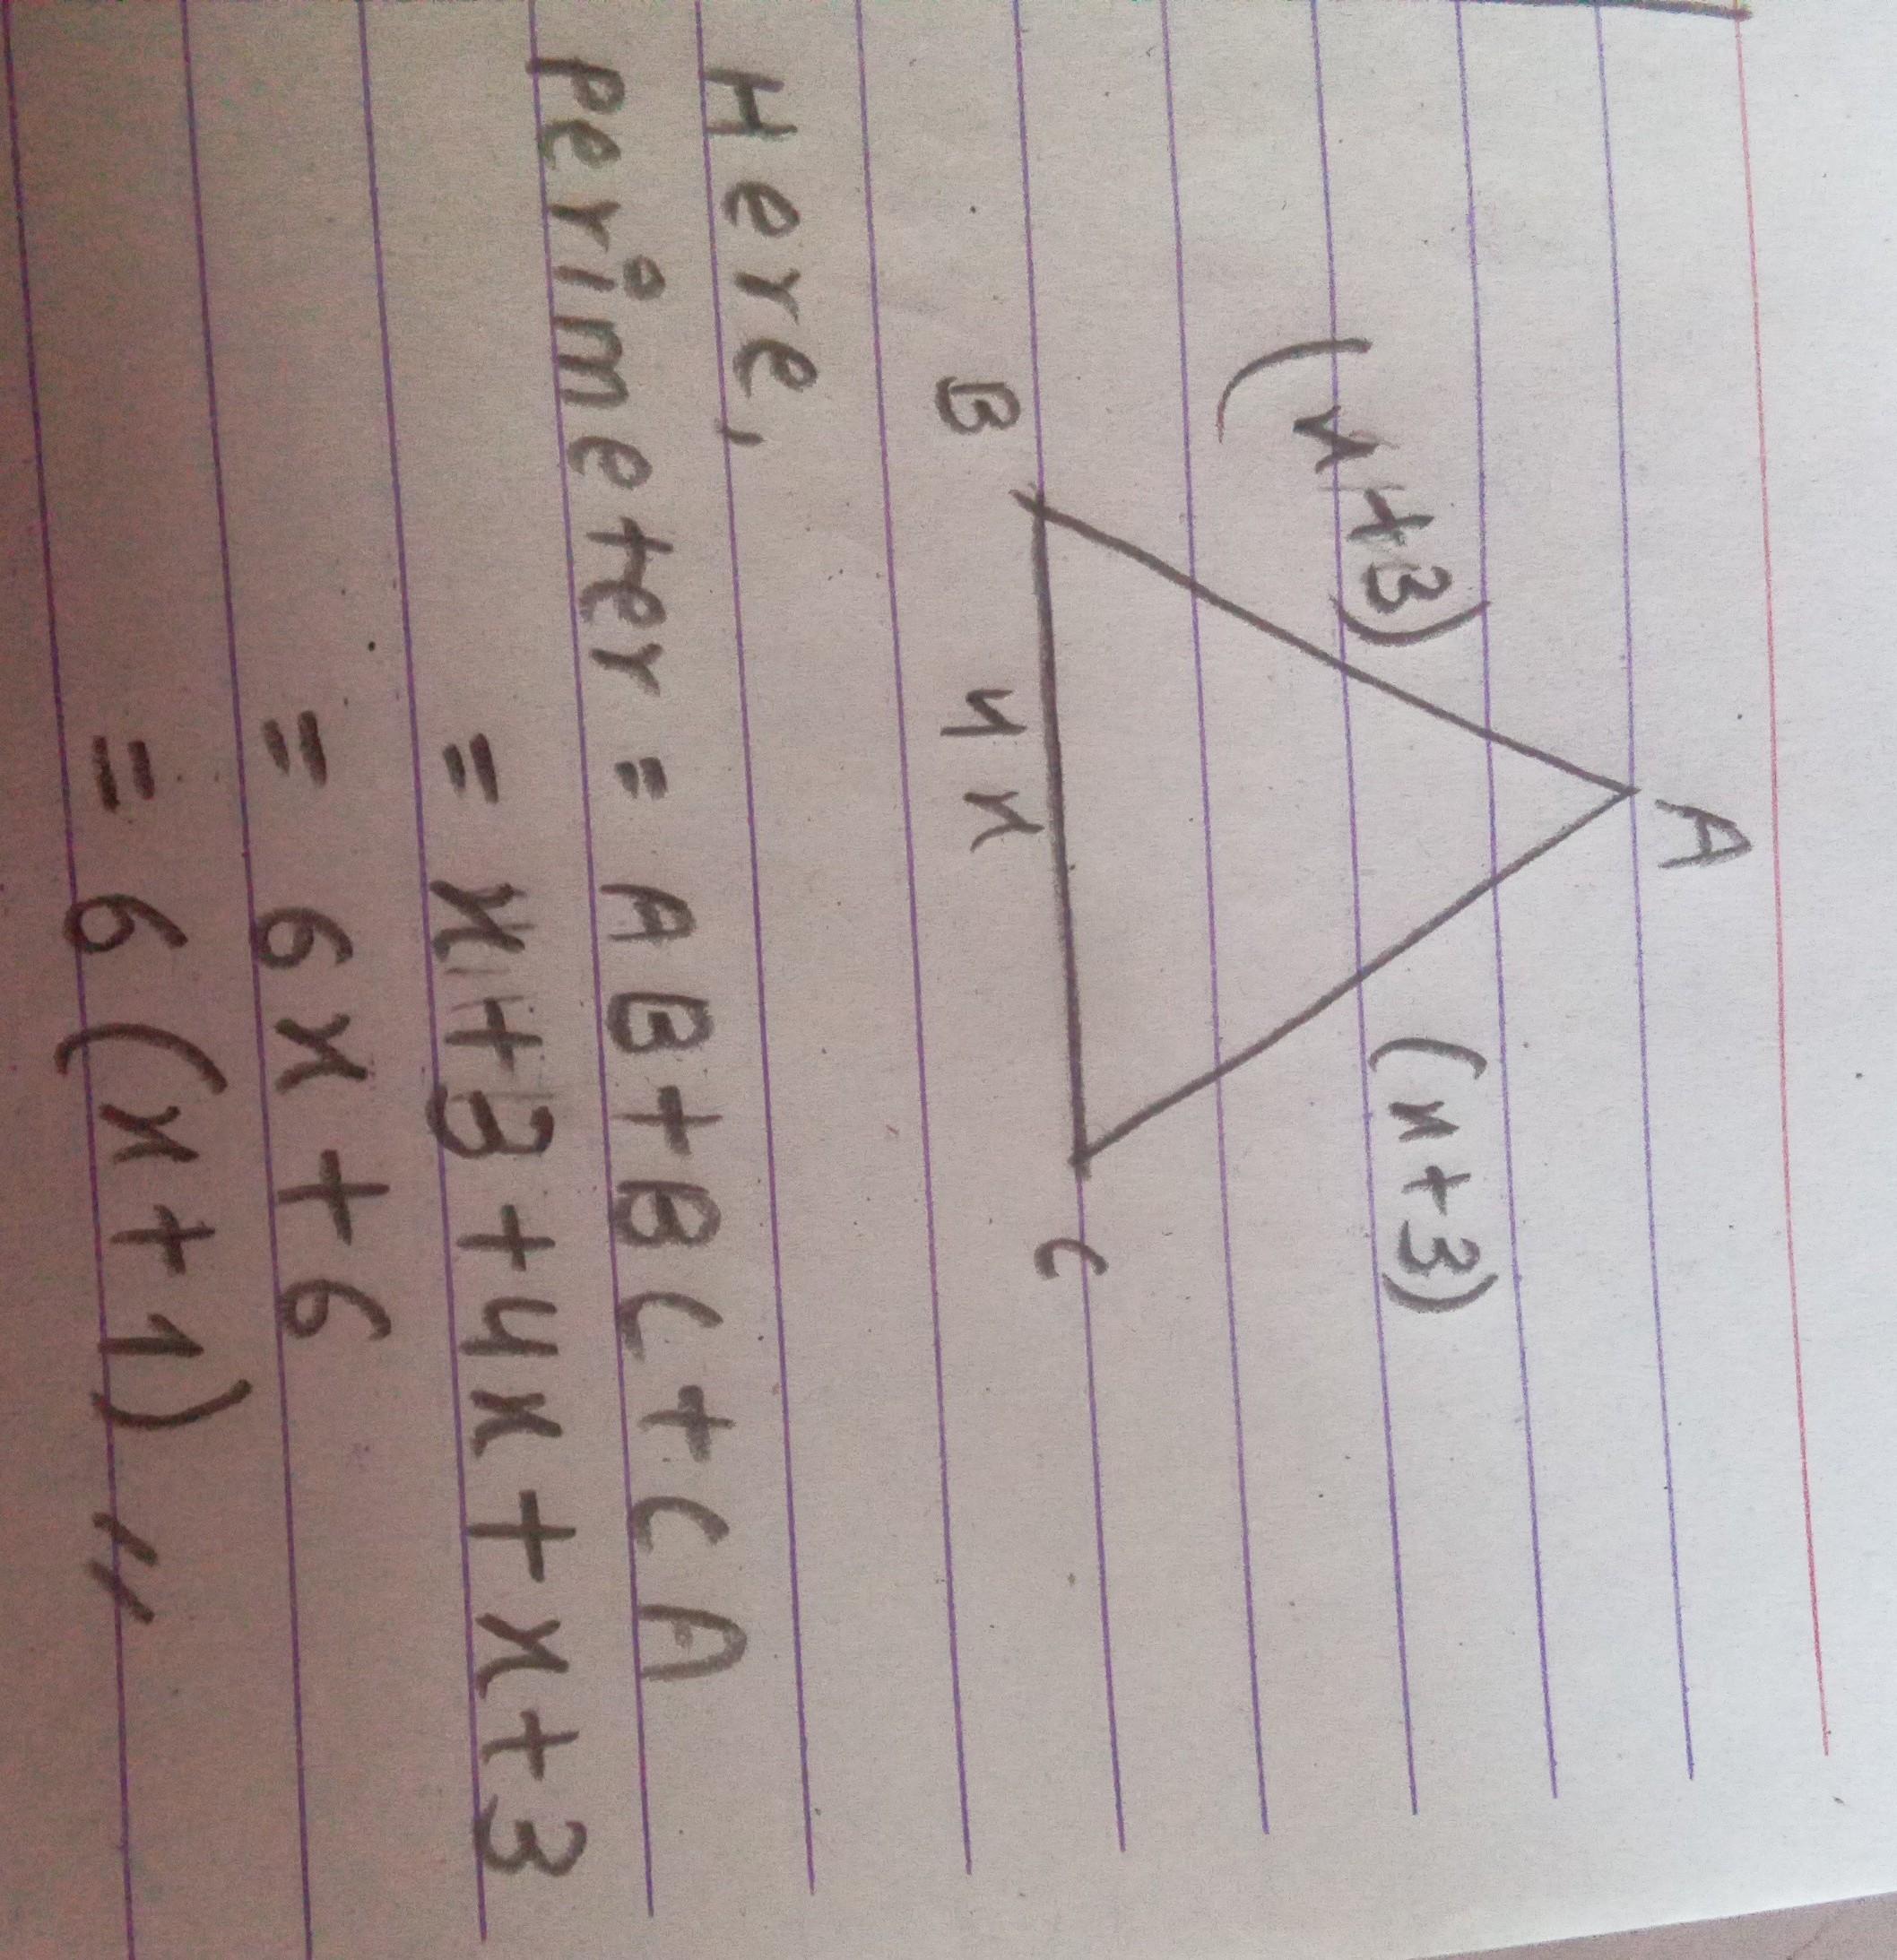 A Triangle Has One Side That Measures 4x And Two Sides That Measure X+3 Each. Write An Expression For